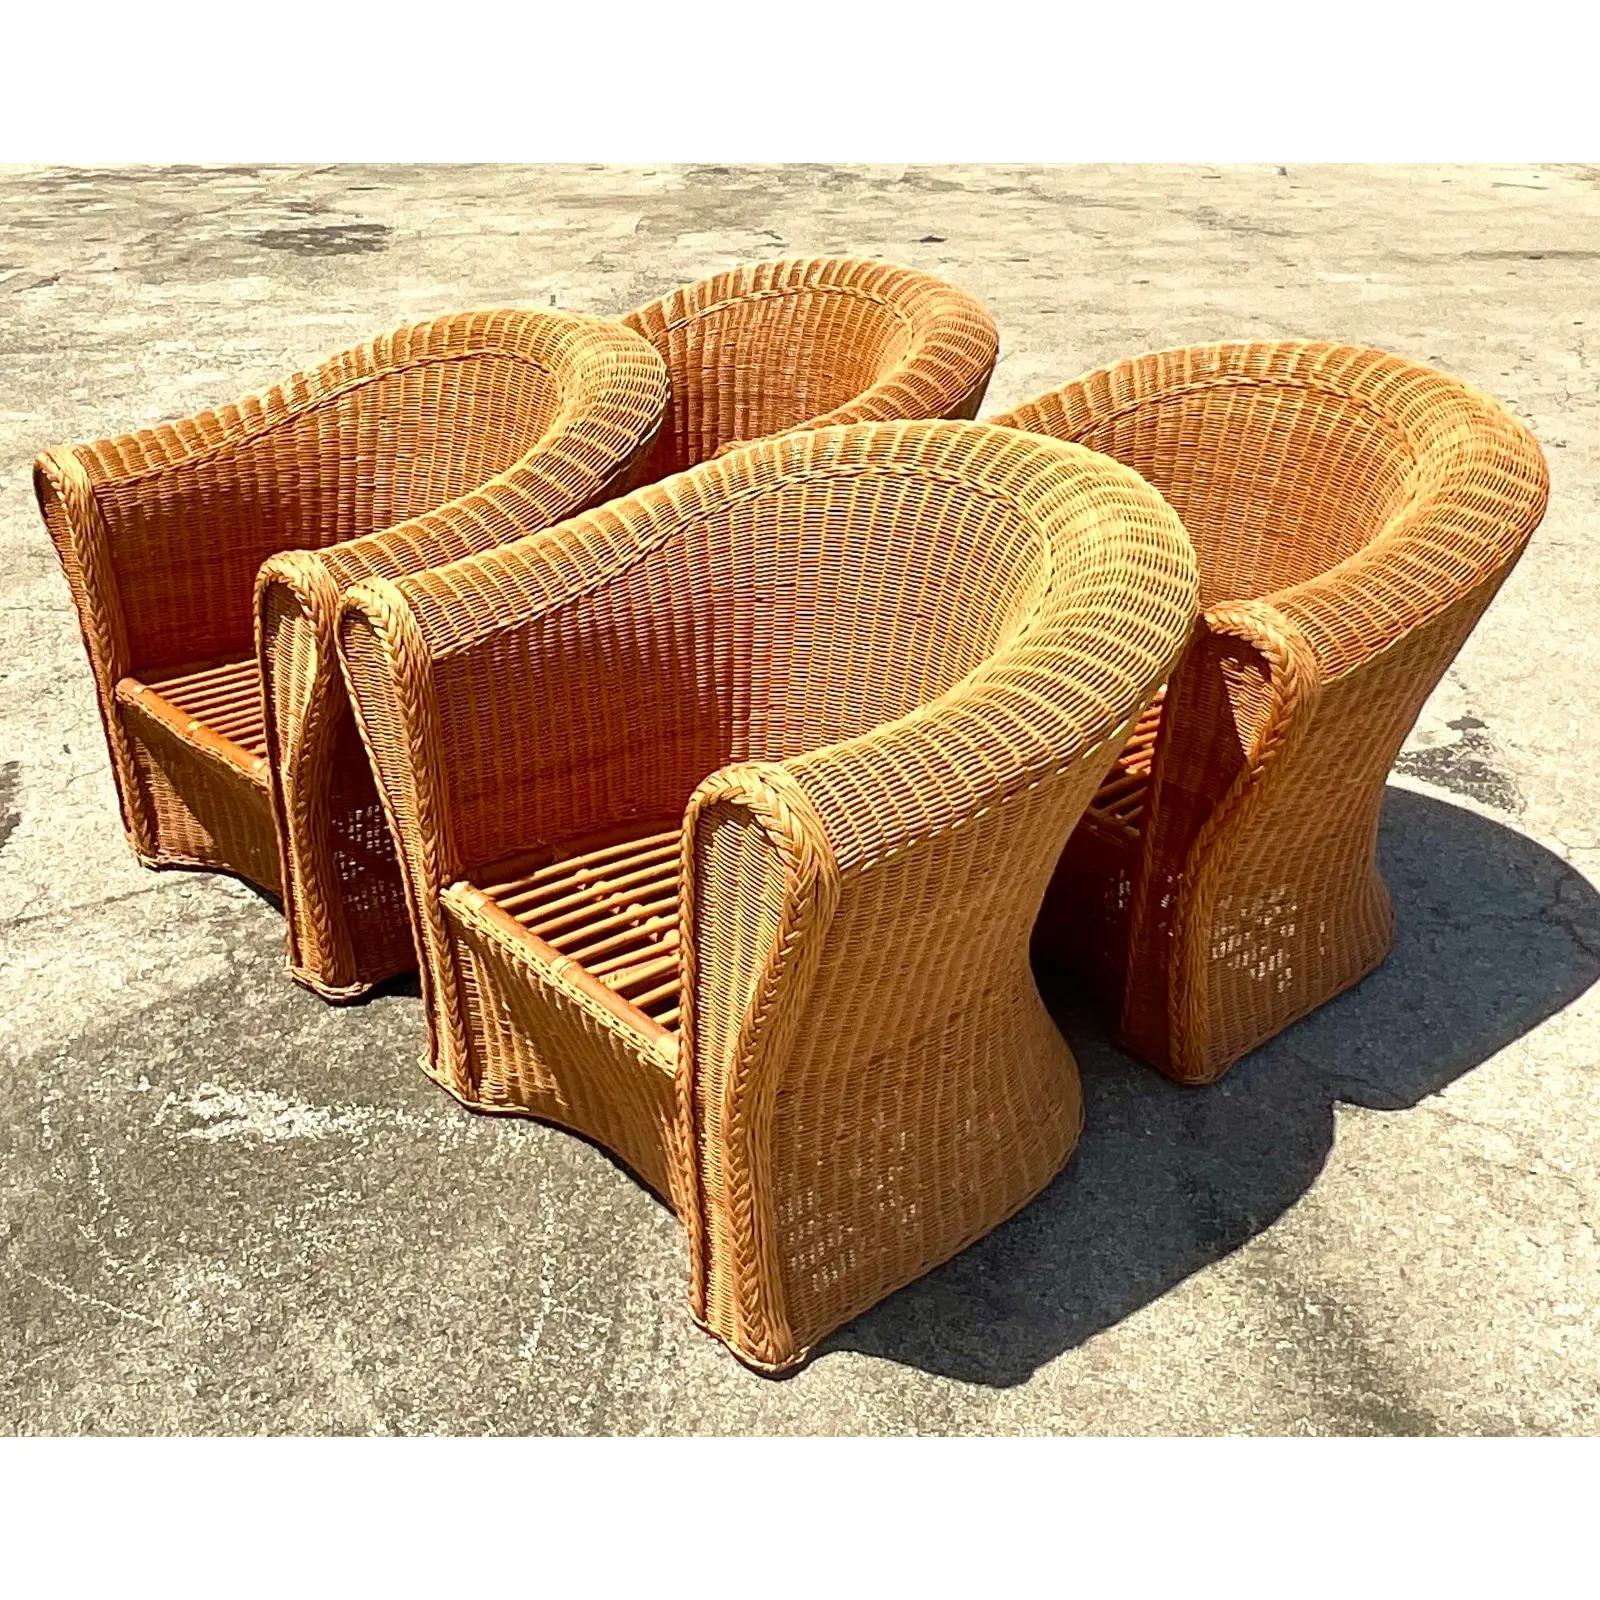 Gorgeous vintage woven rattan lounge chairs. A set of four roll back with deep relaxing seats. Acquired from a Palm Beach estate.